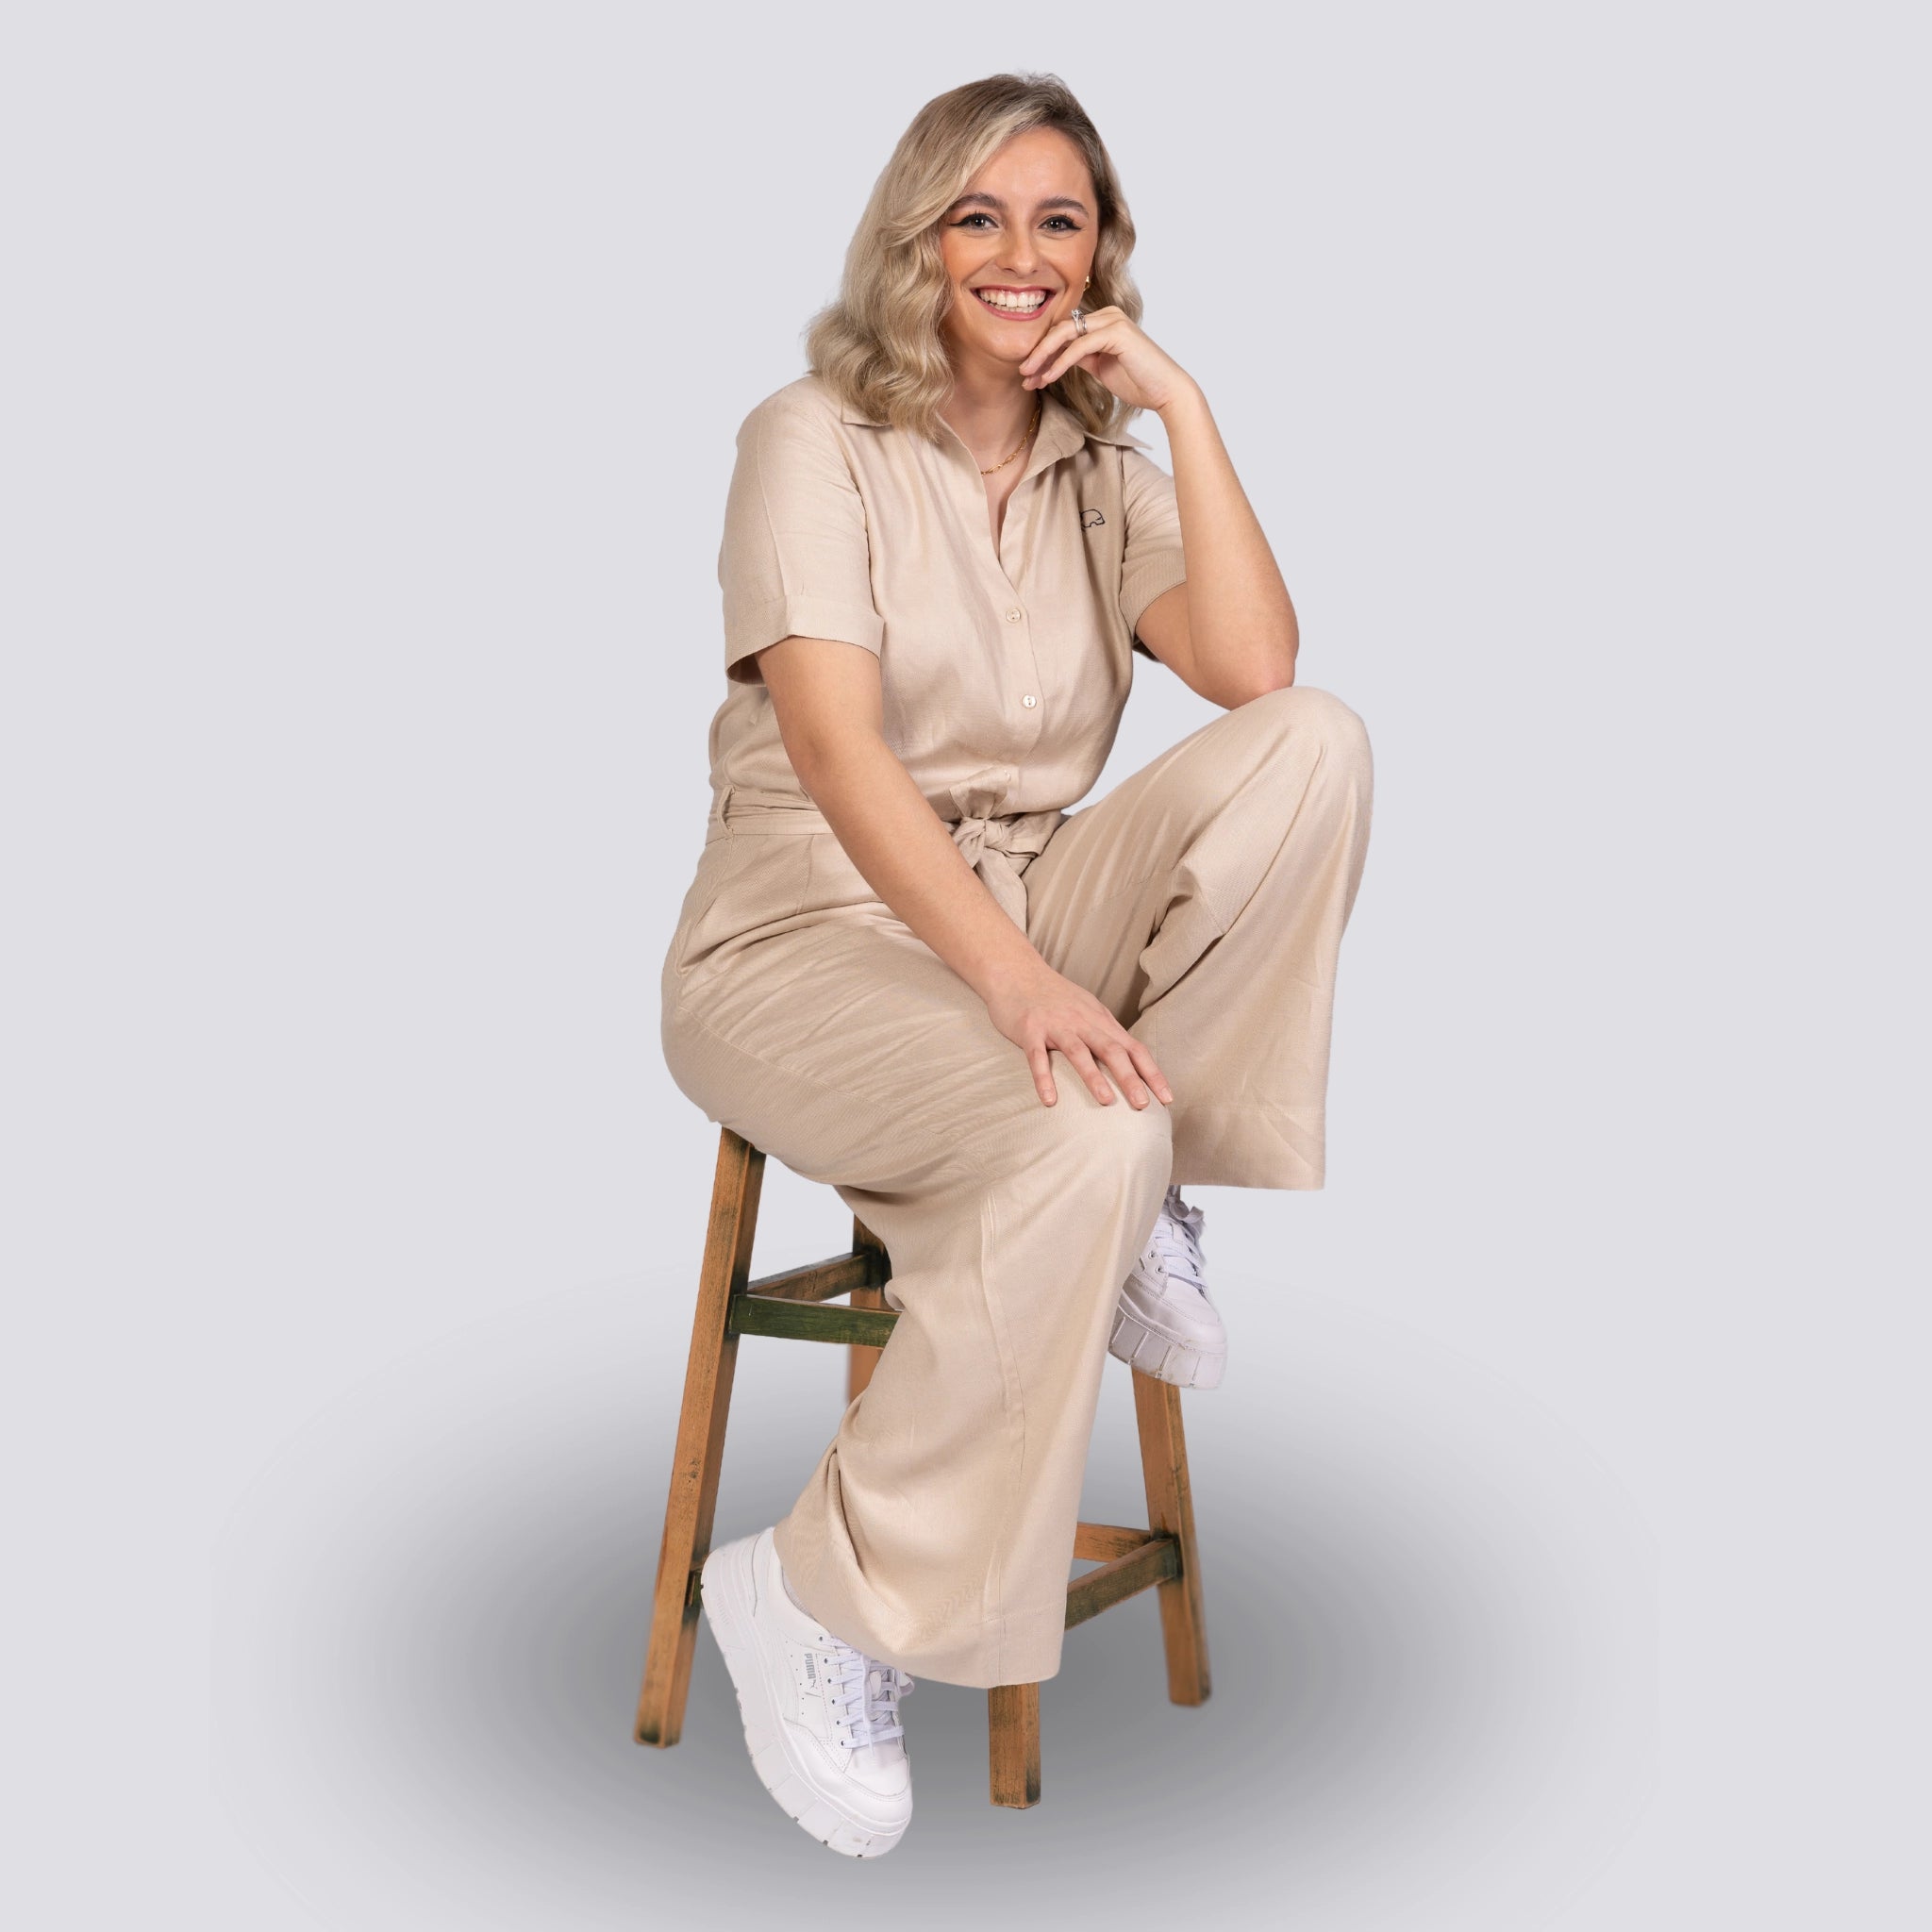 Smiling woman in a Karee Merino Elegance Viscose Linen Jumpsuit sitting on a wooden stool against a gray background.